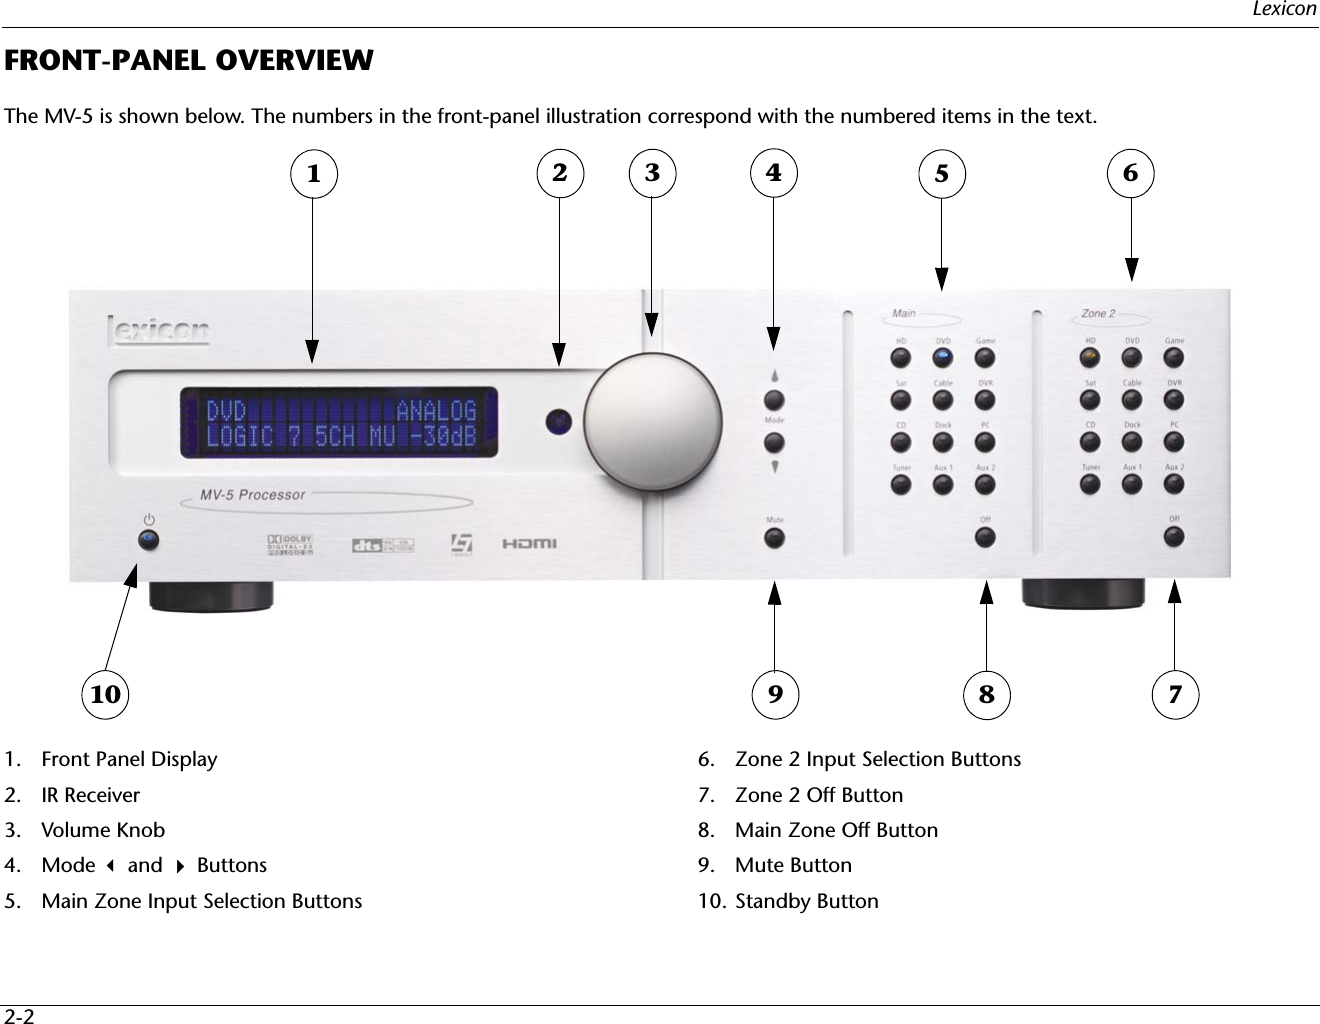 Lexicon2-2FRONT-PANEL OVERVIEWThe MV-5 is shown below. The numbers in the front-panel illustration correspond with the numbered items in the text.1. Front Panel Display2. IR Receiver3. Volume Knob4. Mode  and  Buttons5. Main Zone Input Selection Buttons6. Zone 2 Input Selection Buttons7. Zone 2 Off Button8. Main Zone Off Button9. Mute Button10. Standby Button 1  2  3  5  6 410  9  8  7